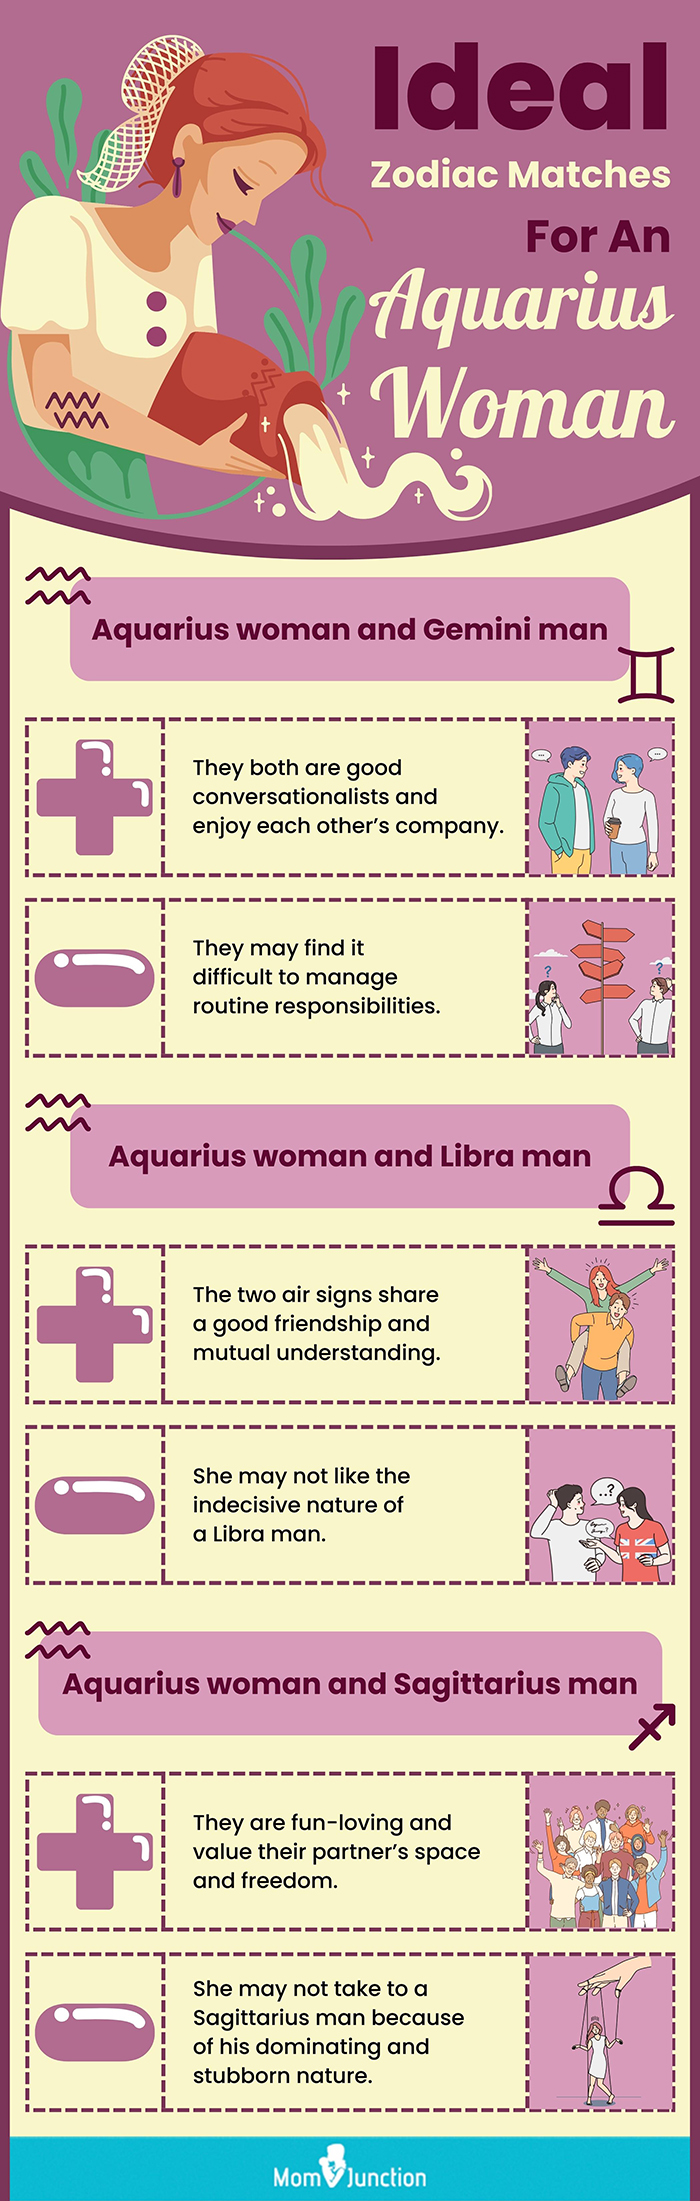 ideal zodiac matches for an aquarius woman (infographic)